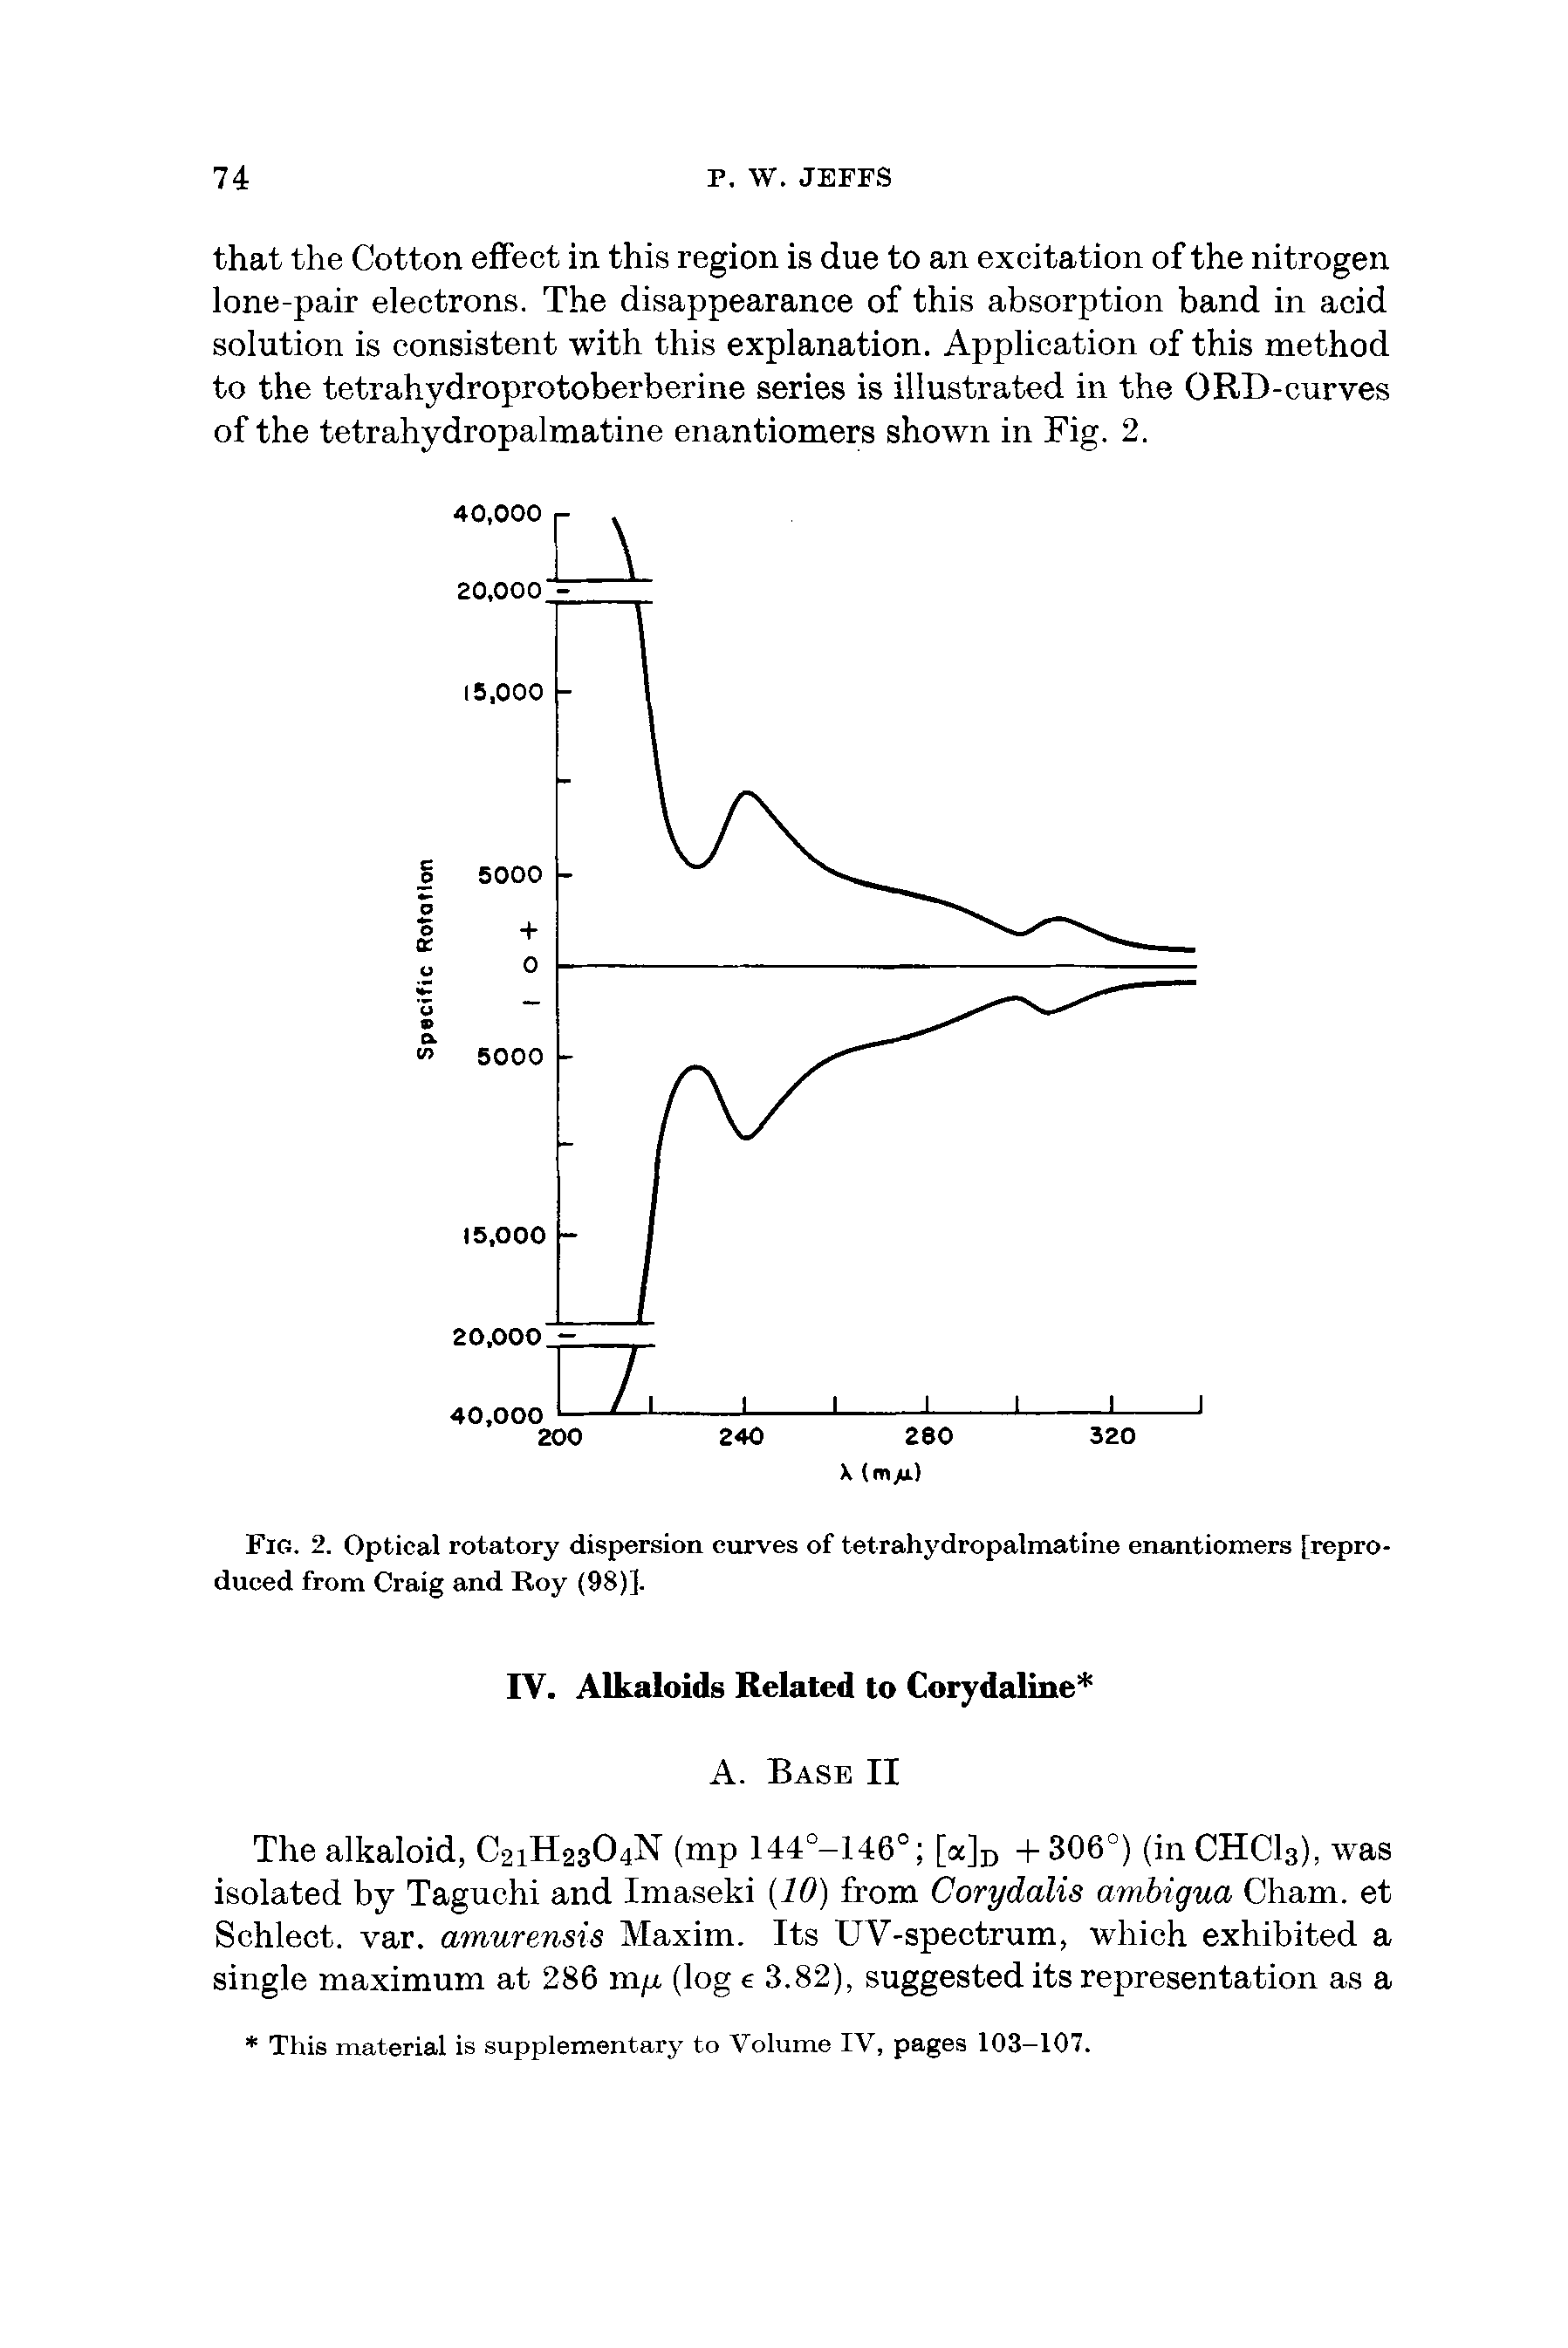 Fig. 2. Optical rotatory dispersion curves of tetrahydropalmatine enantiomers [reproduced from Craig and Roy (98)].